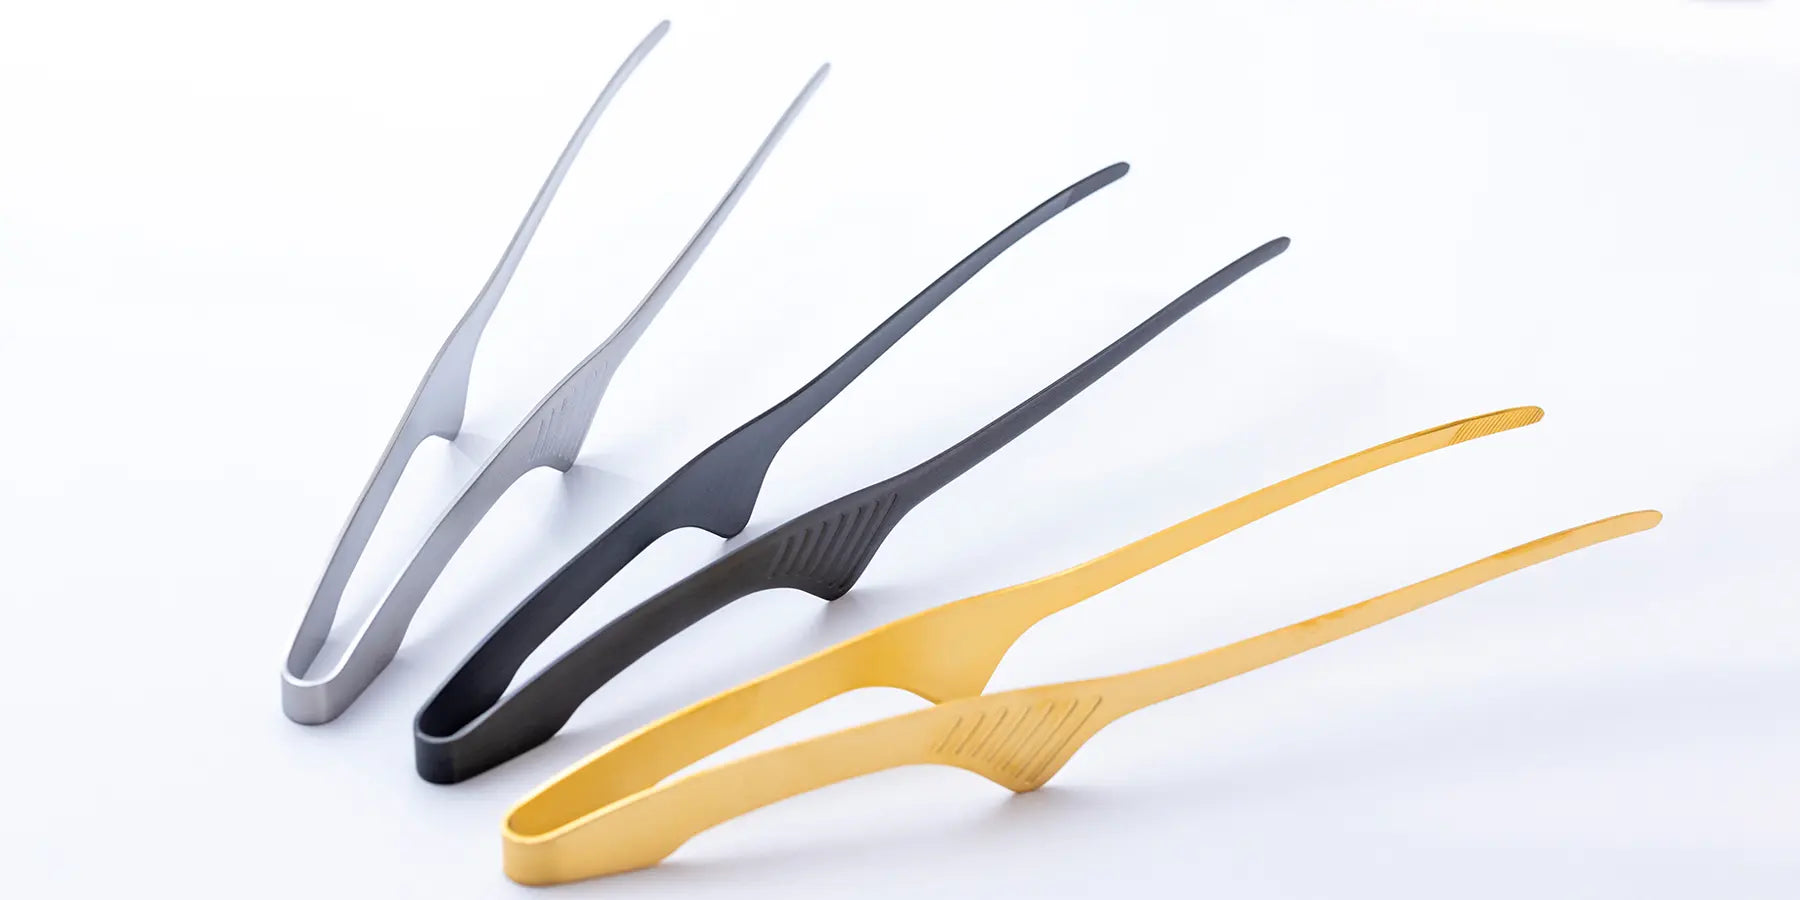 Discover our great selection of Tongs at Globalkitchen Japan.